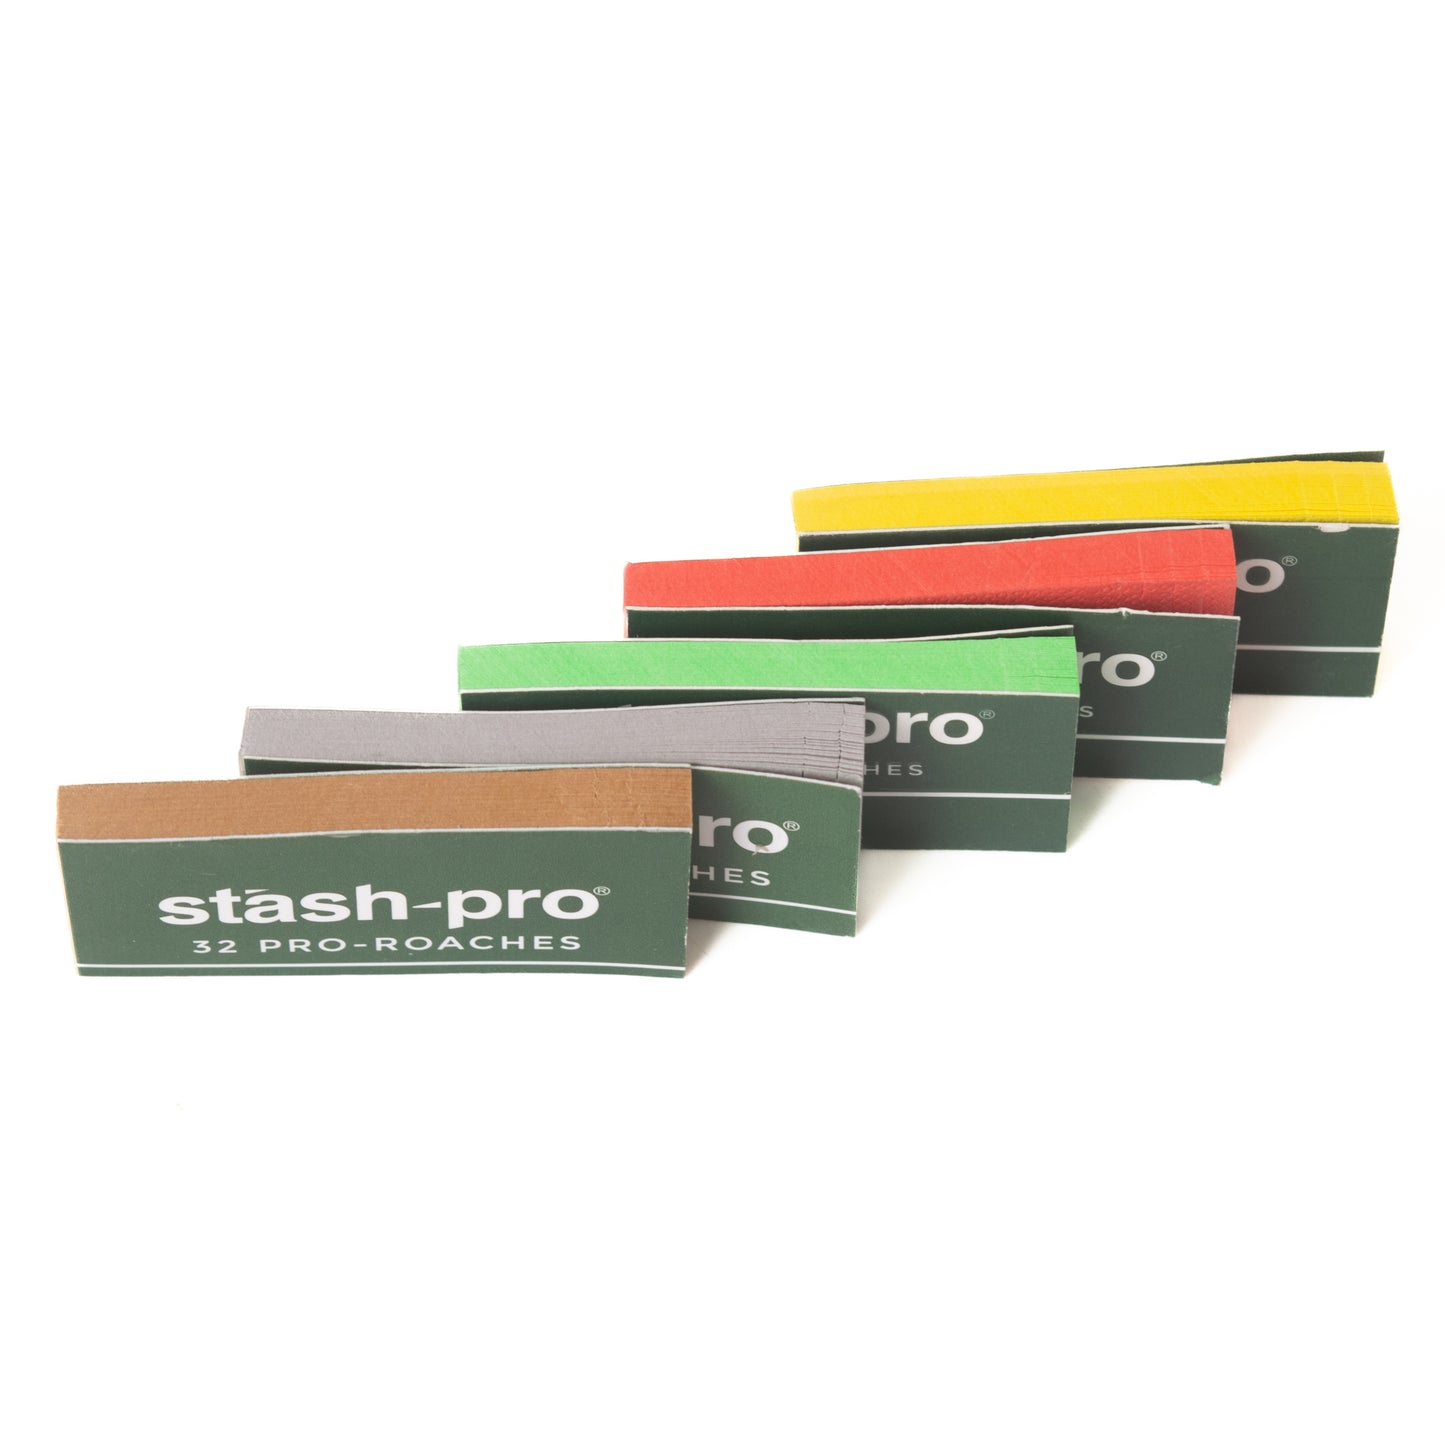 Stash Pro Colorful Roach Tips (32 Leaves) - Pack of 5